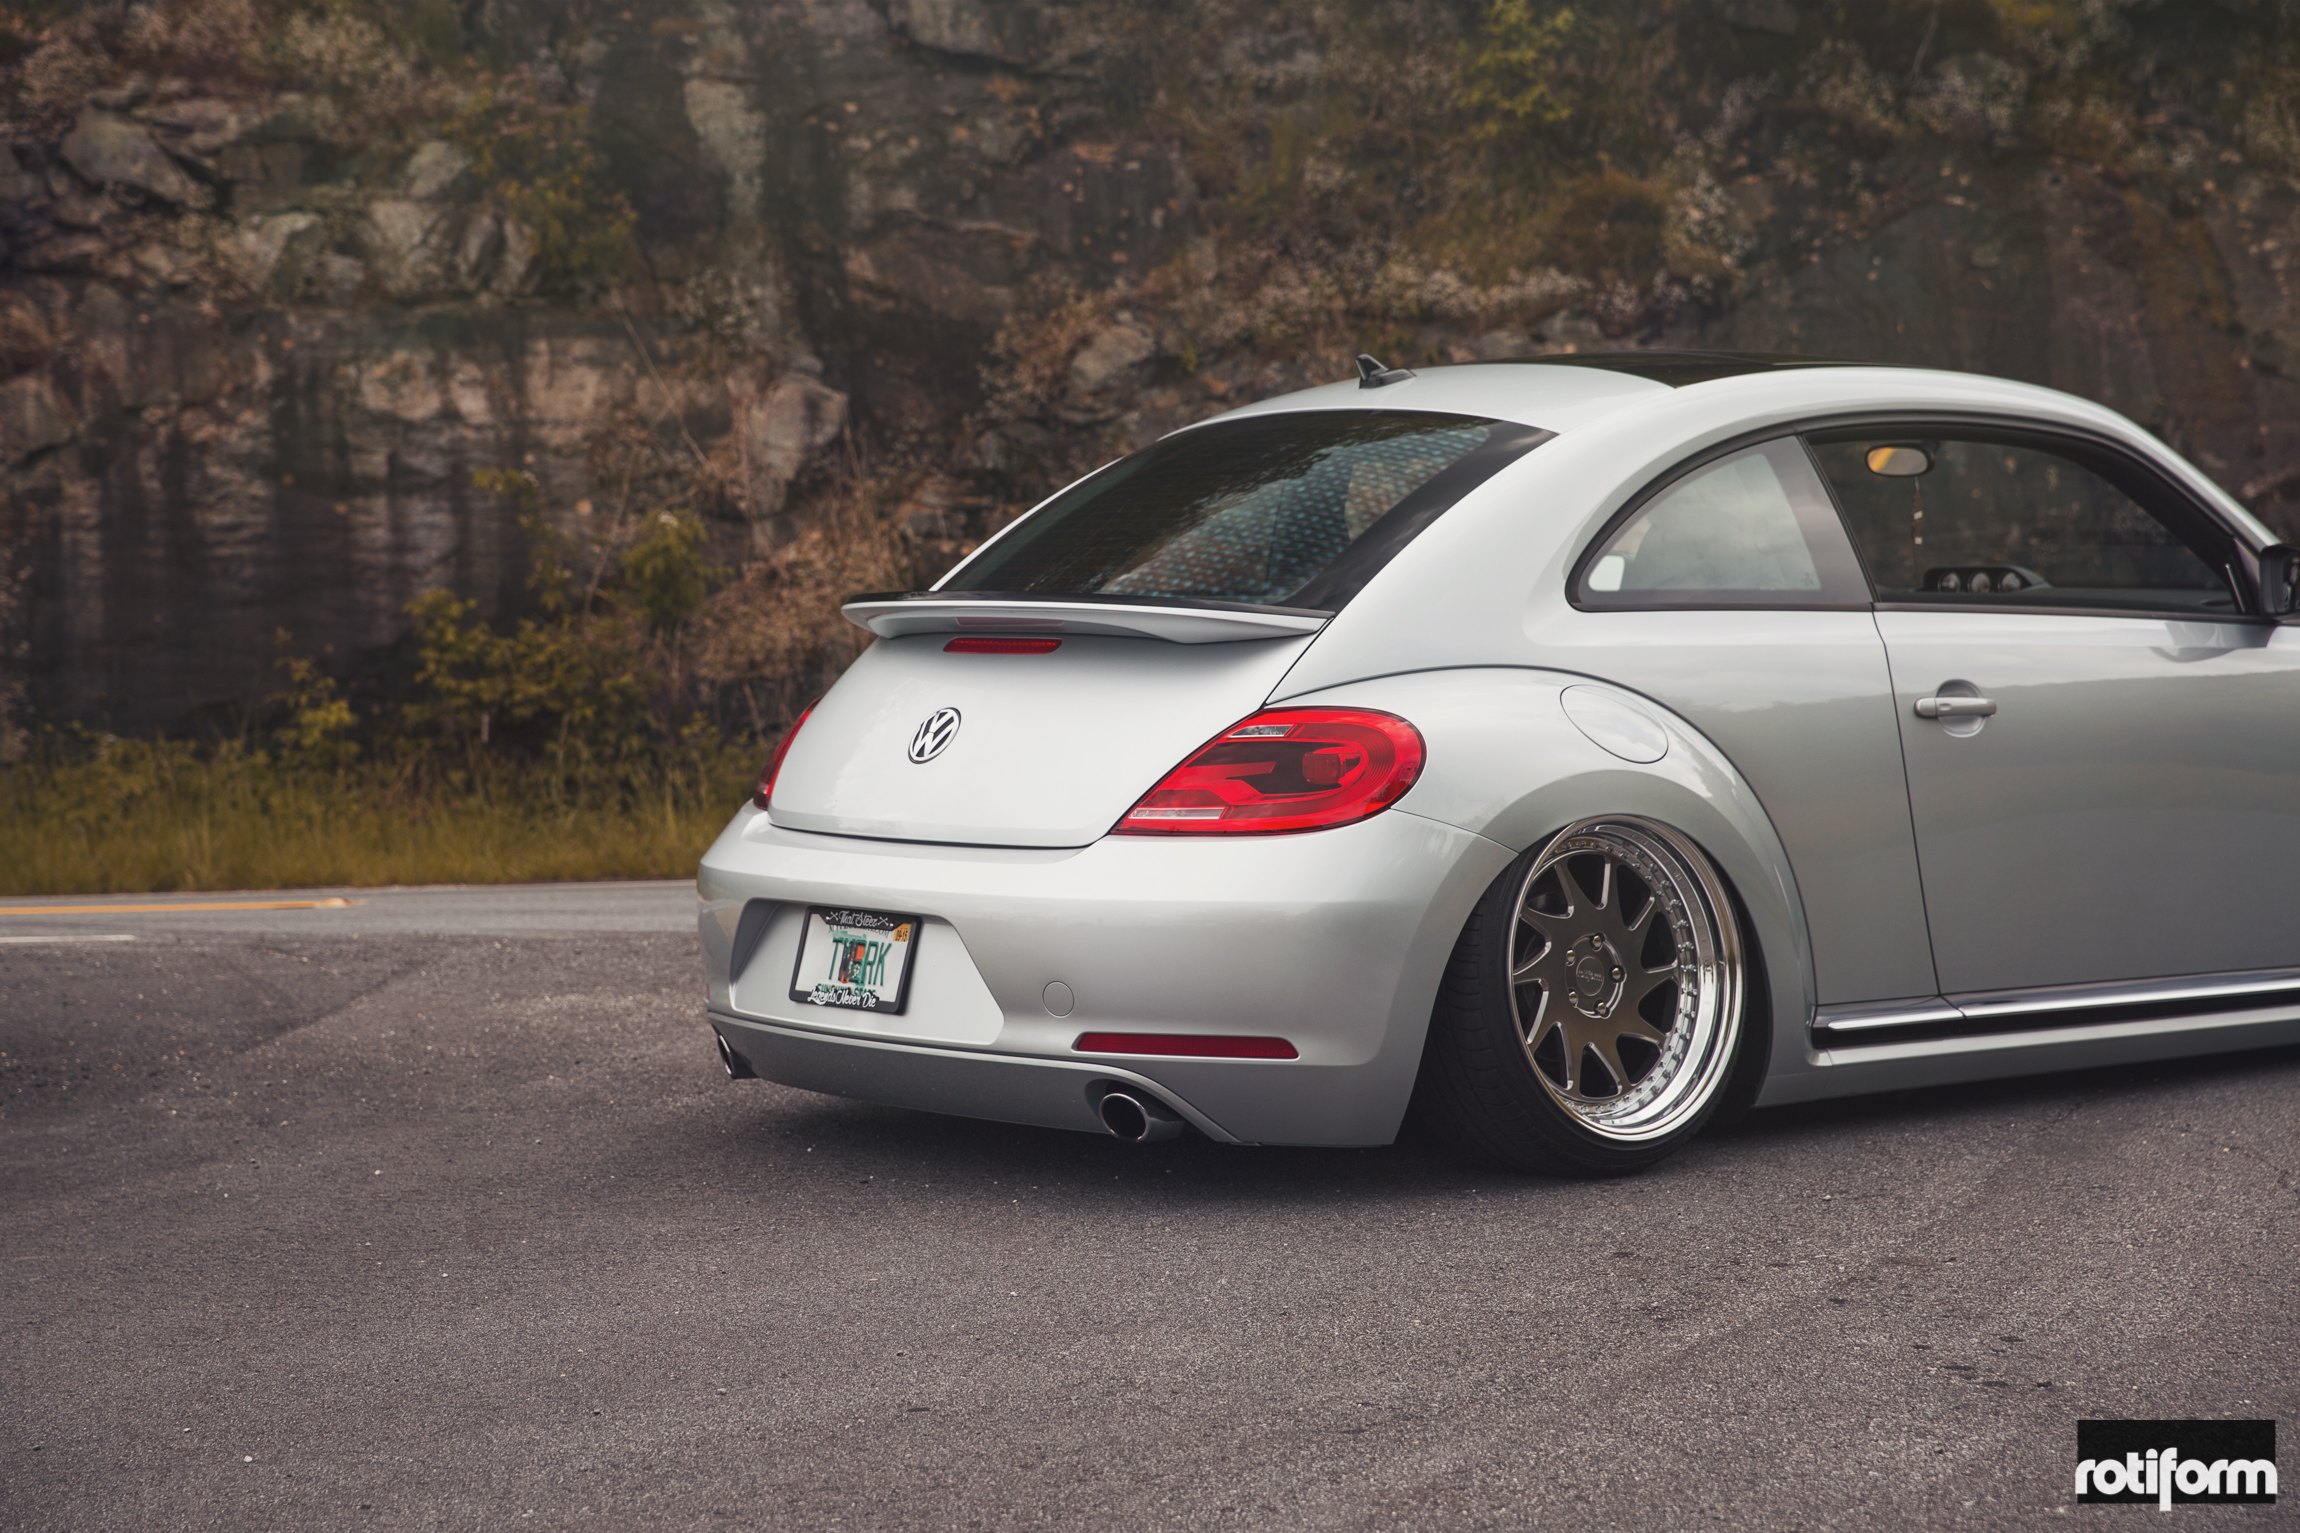 Custom Red Taillights on Silver VW Beetle - Photo by Rotiform